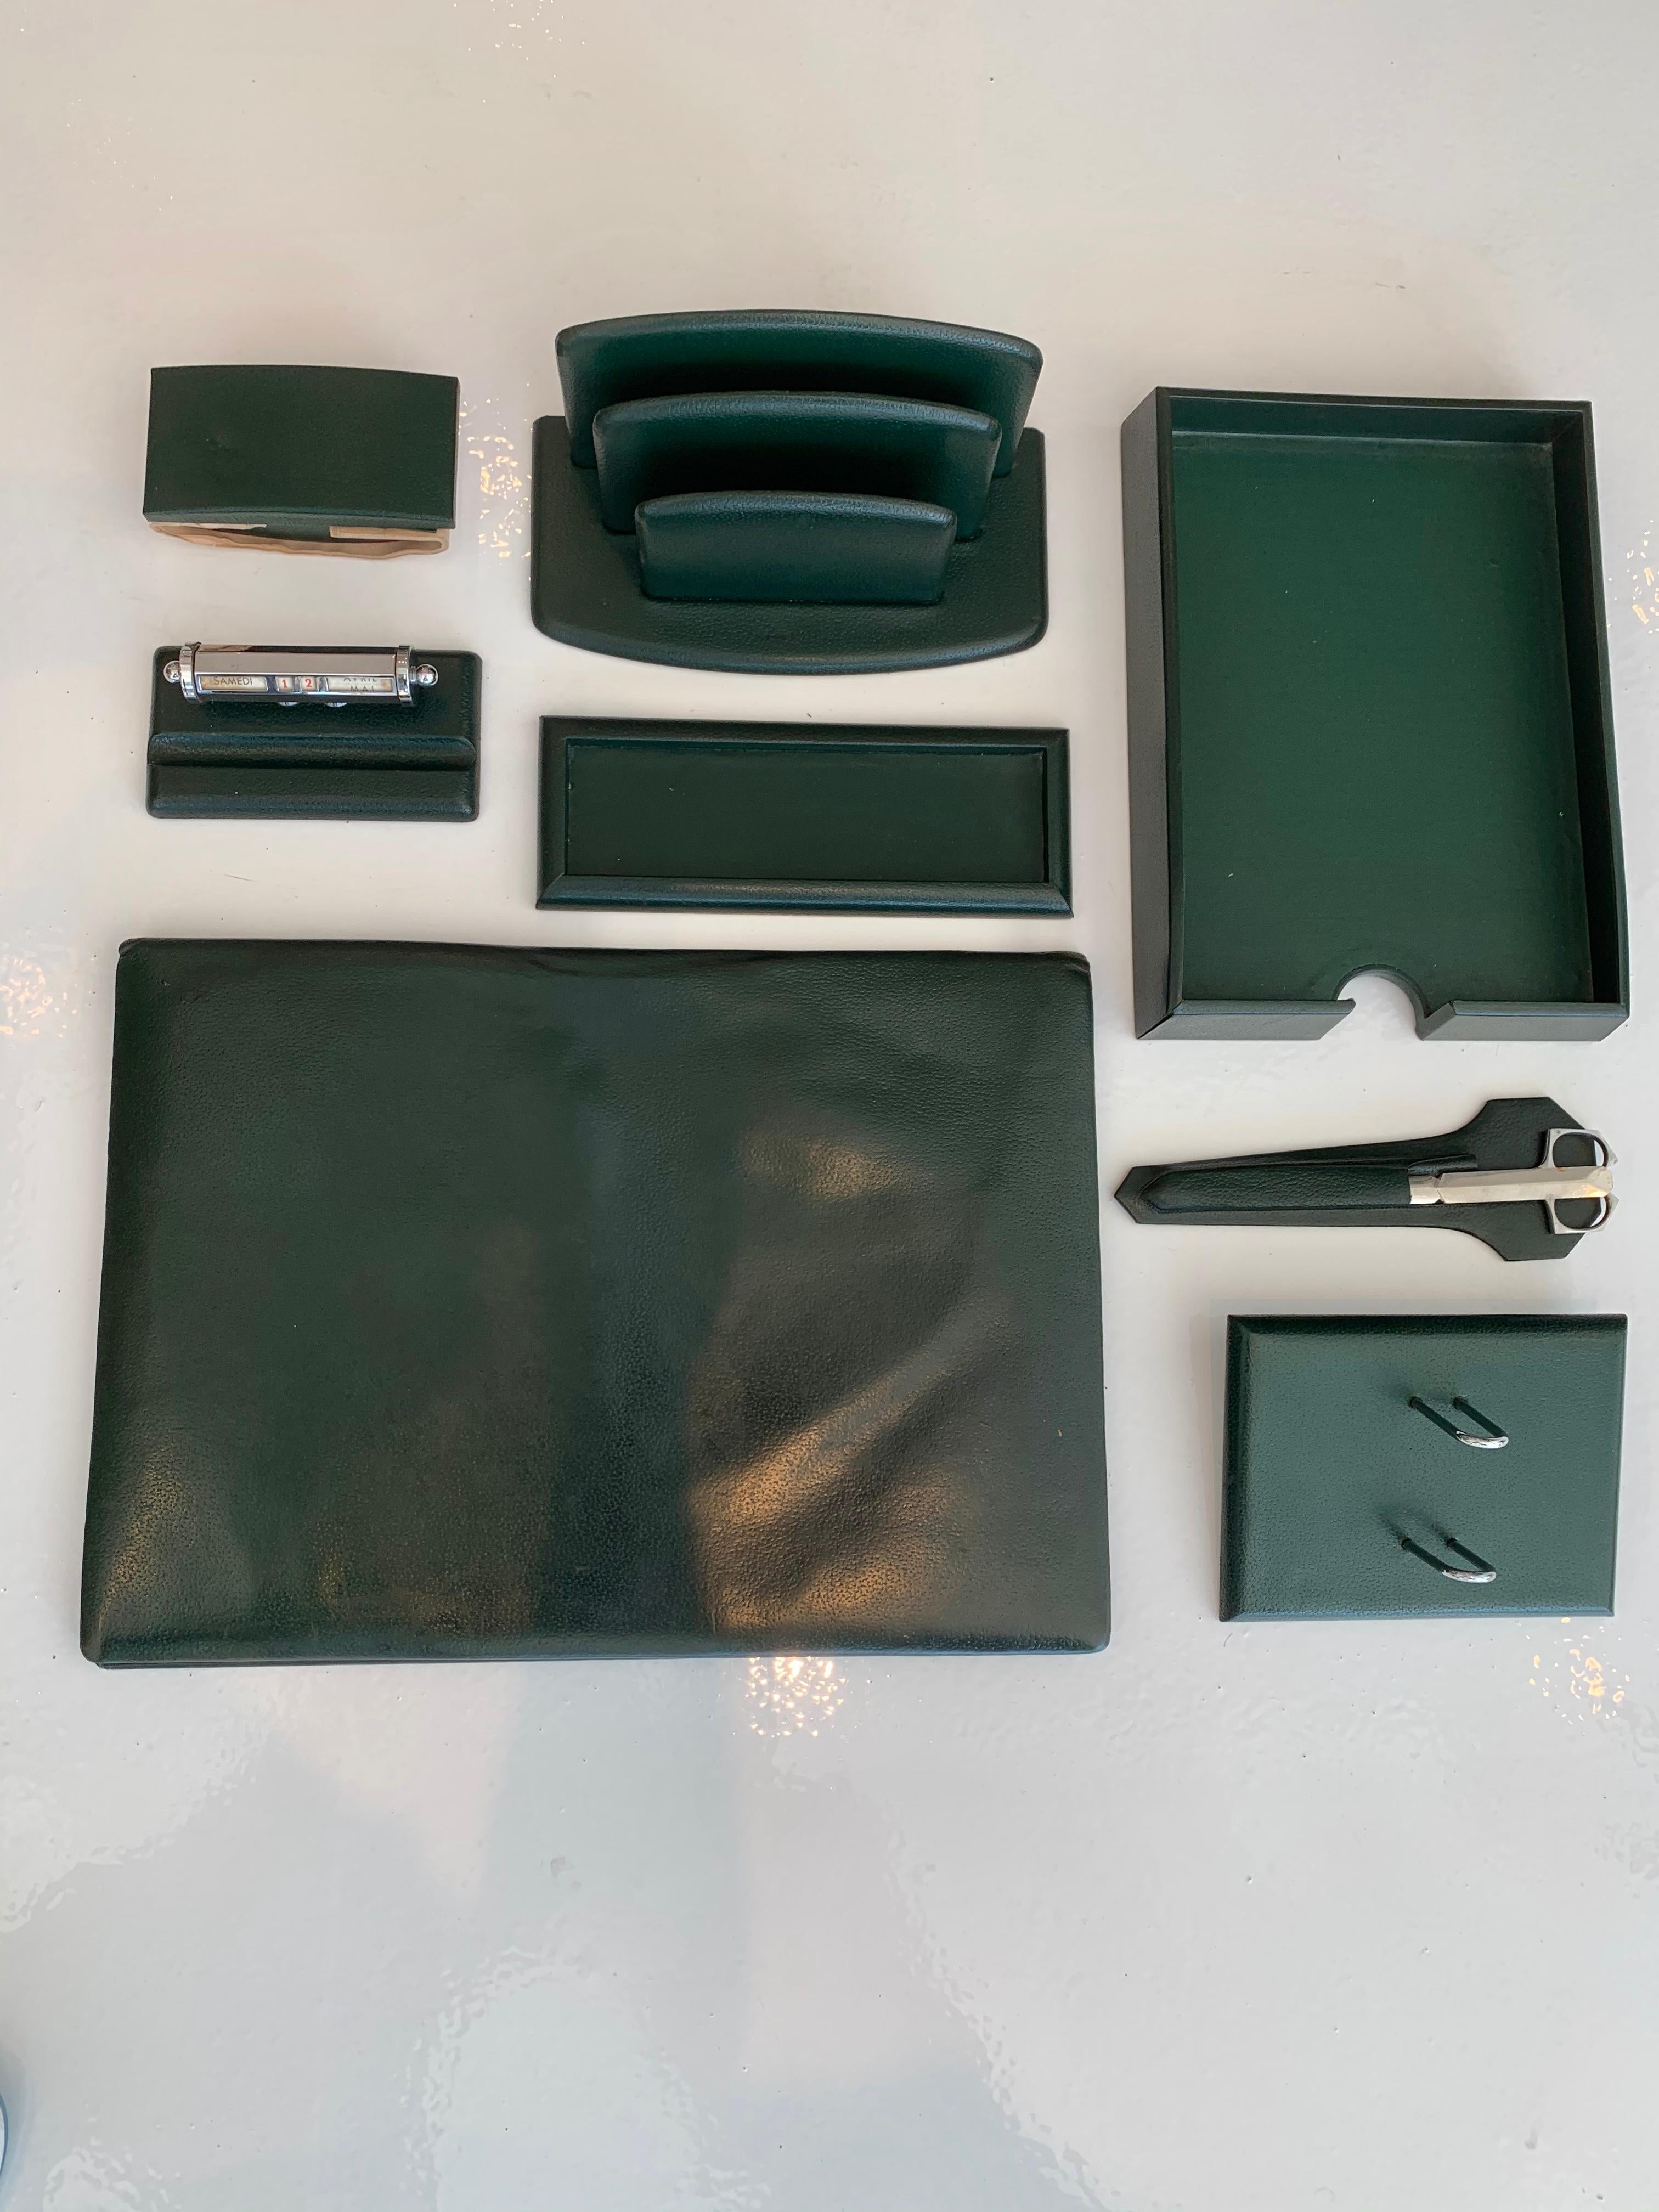 Fantastic 8 piece French leather desk set by Le Tanneur. All pieces wrapped in dark green leather. Desk set includes : desk pad, paper holder, pen holder, ink blotter, mail holder, adjustable calendar, chrome scissors and letter opener and a